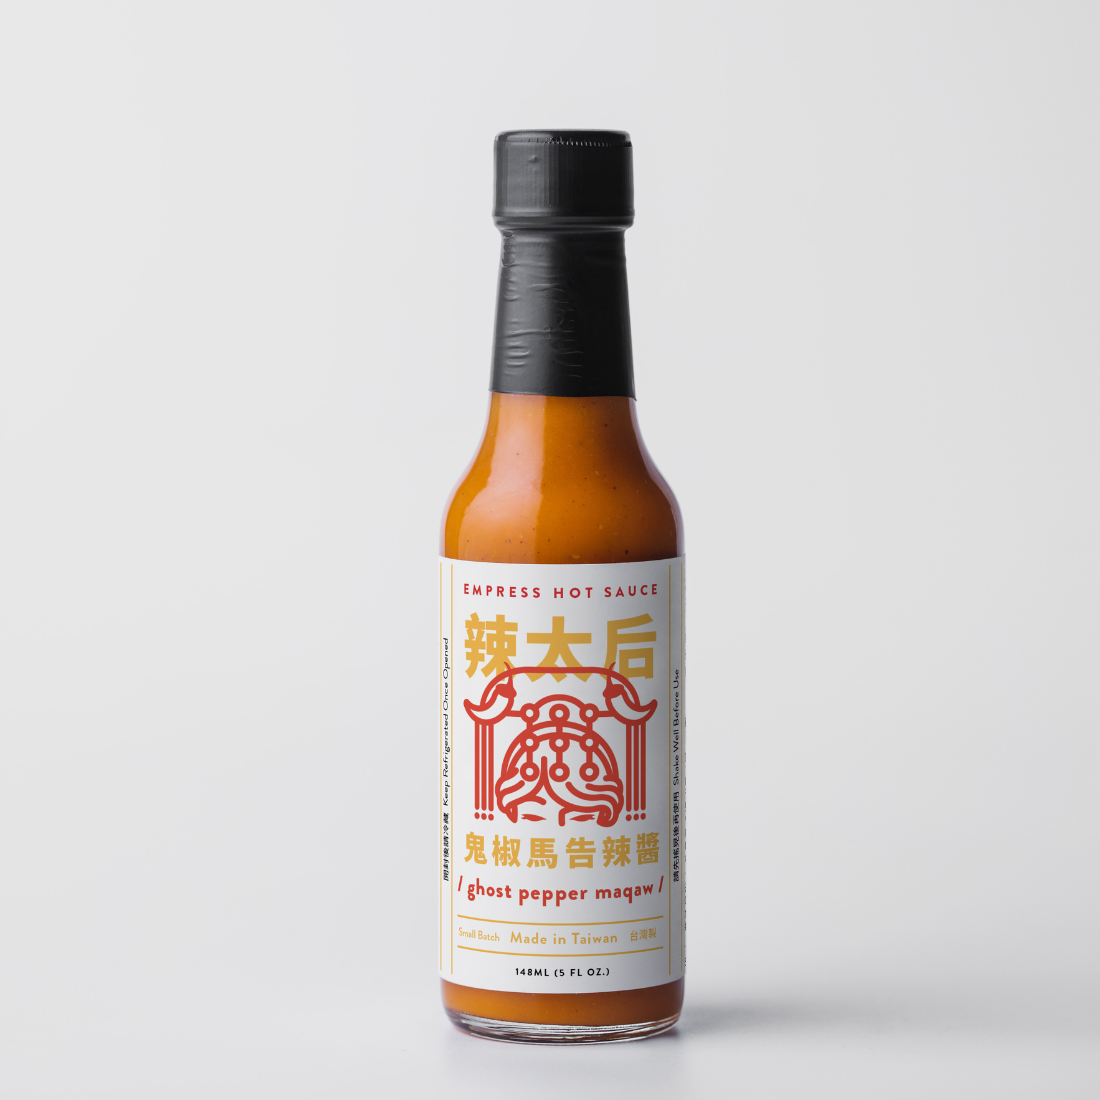 Ghost Pepper Maqaw Hot Sauce